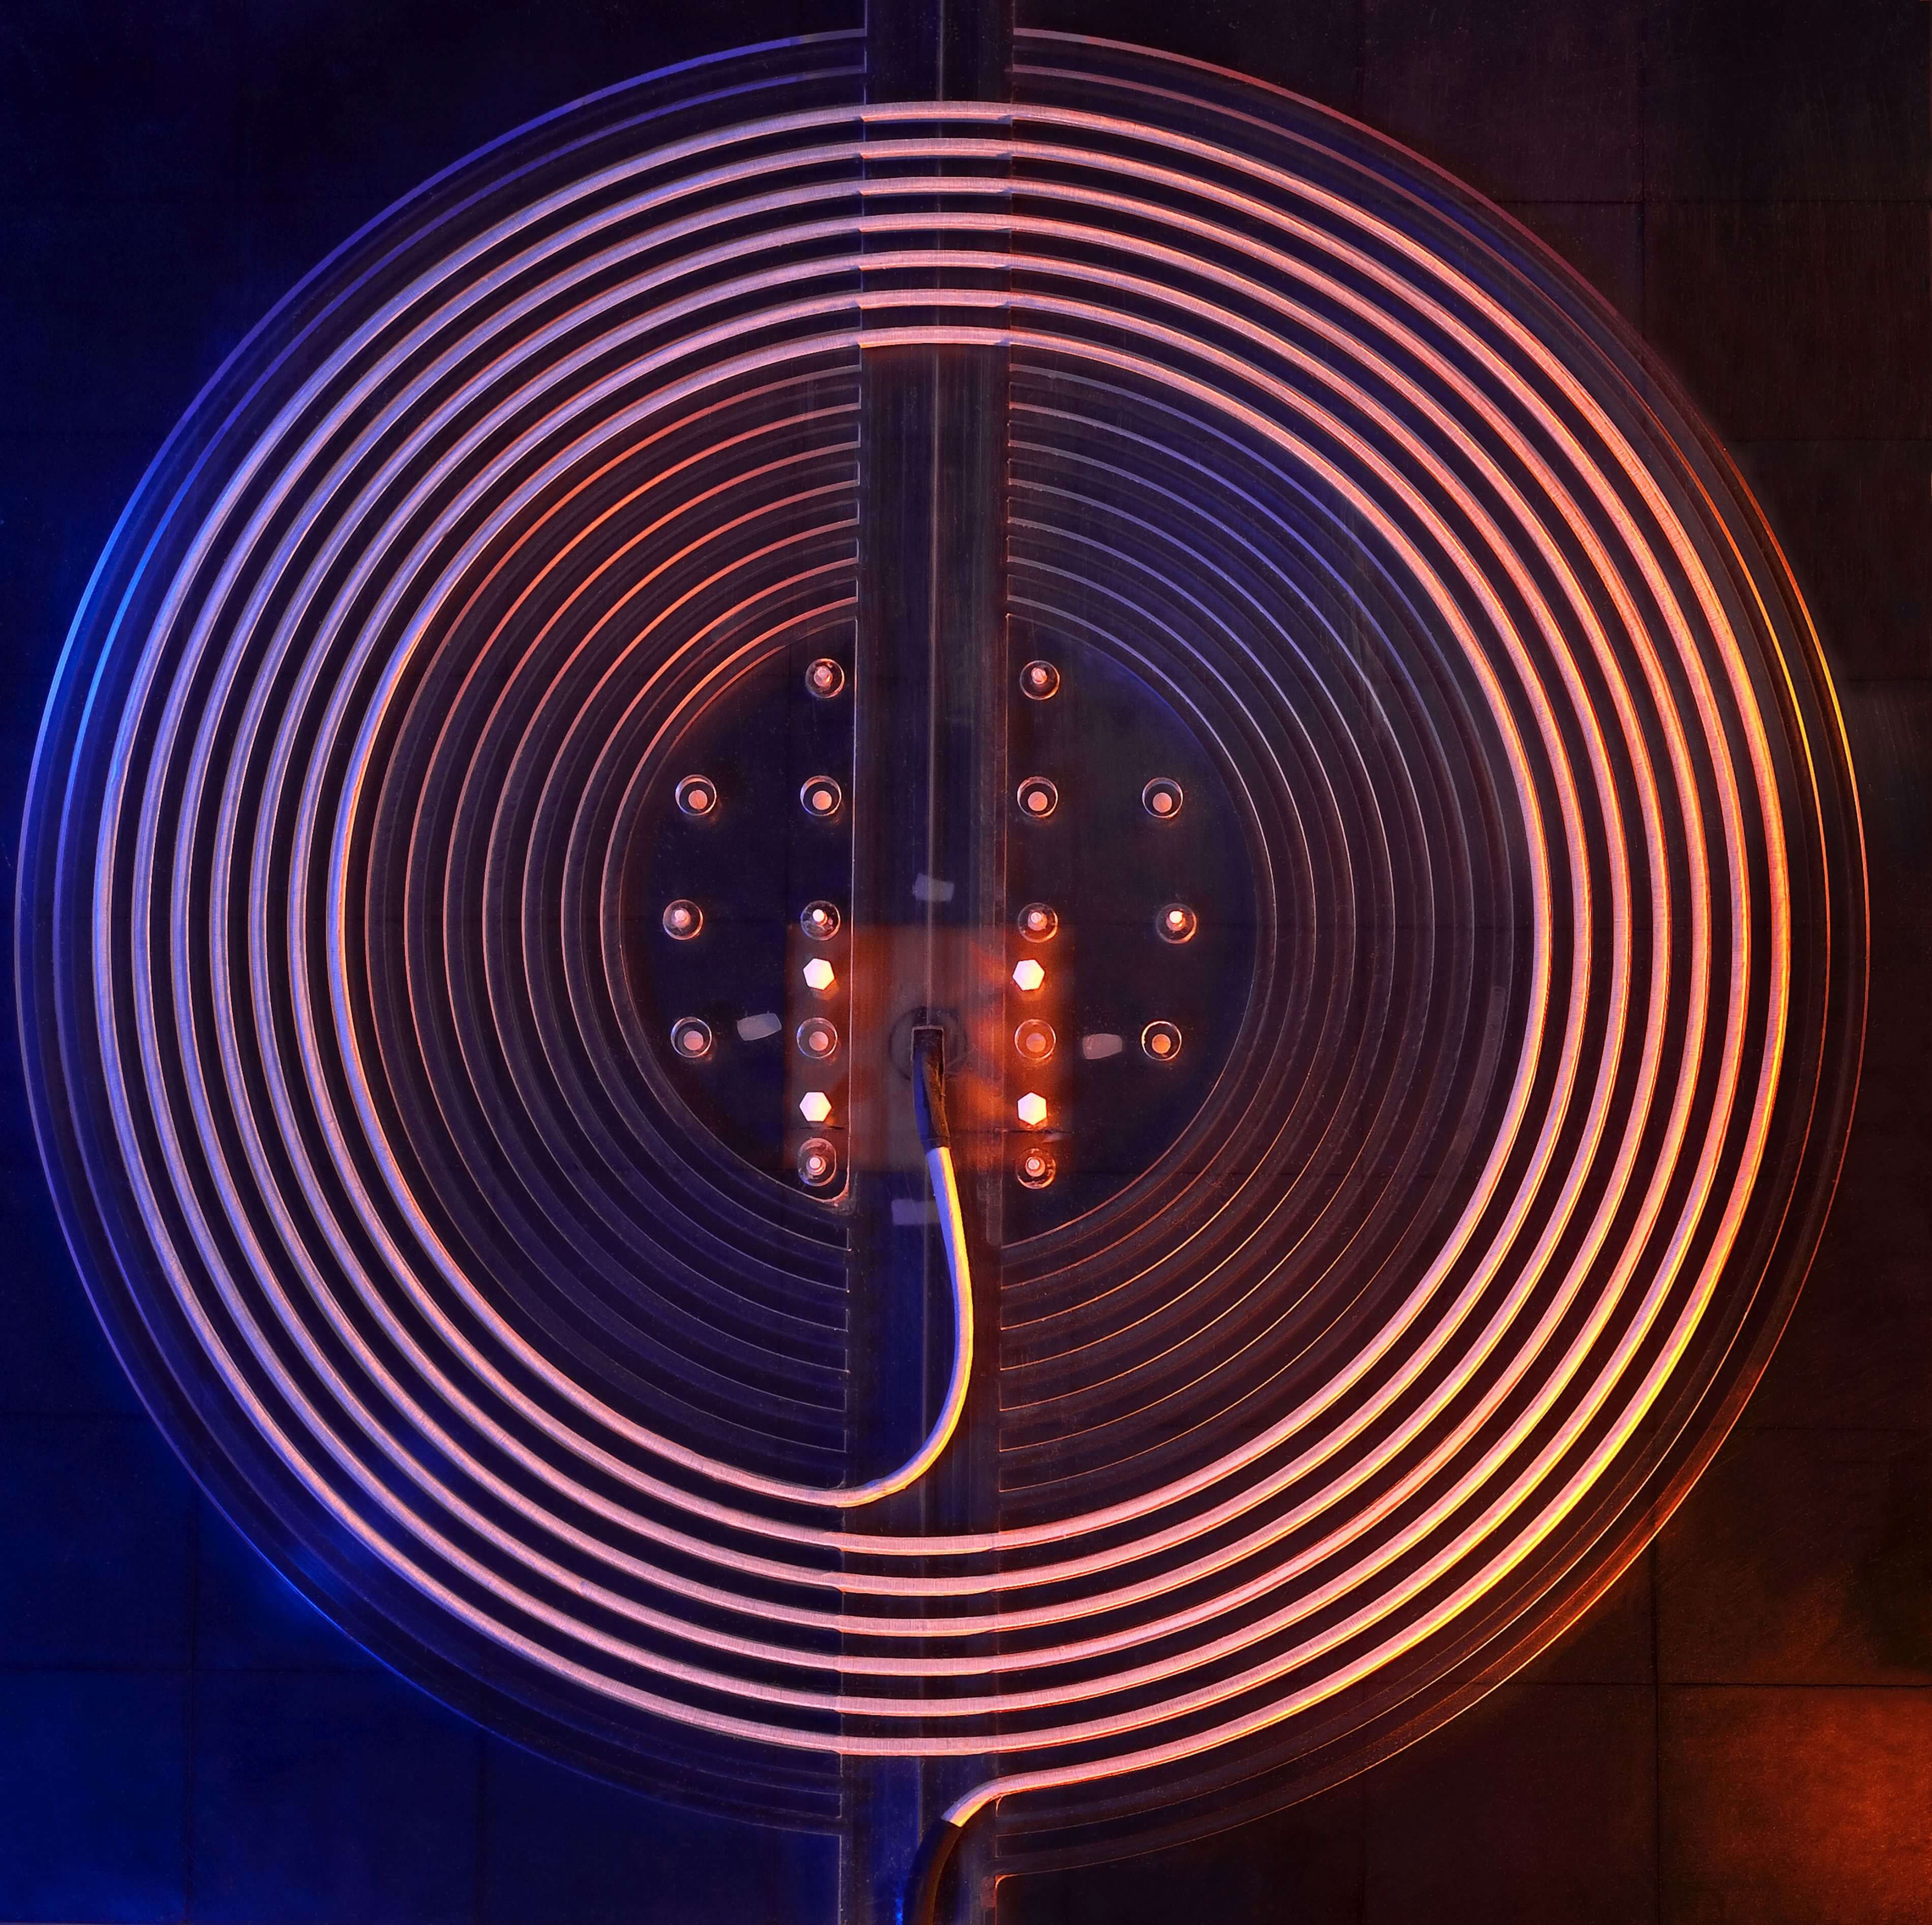 Prototype of a coil (Ø ca. 70 cm) for the wireless energy transfer 